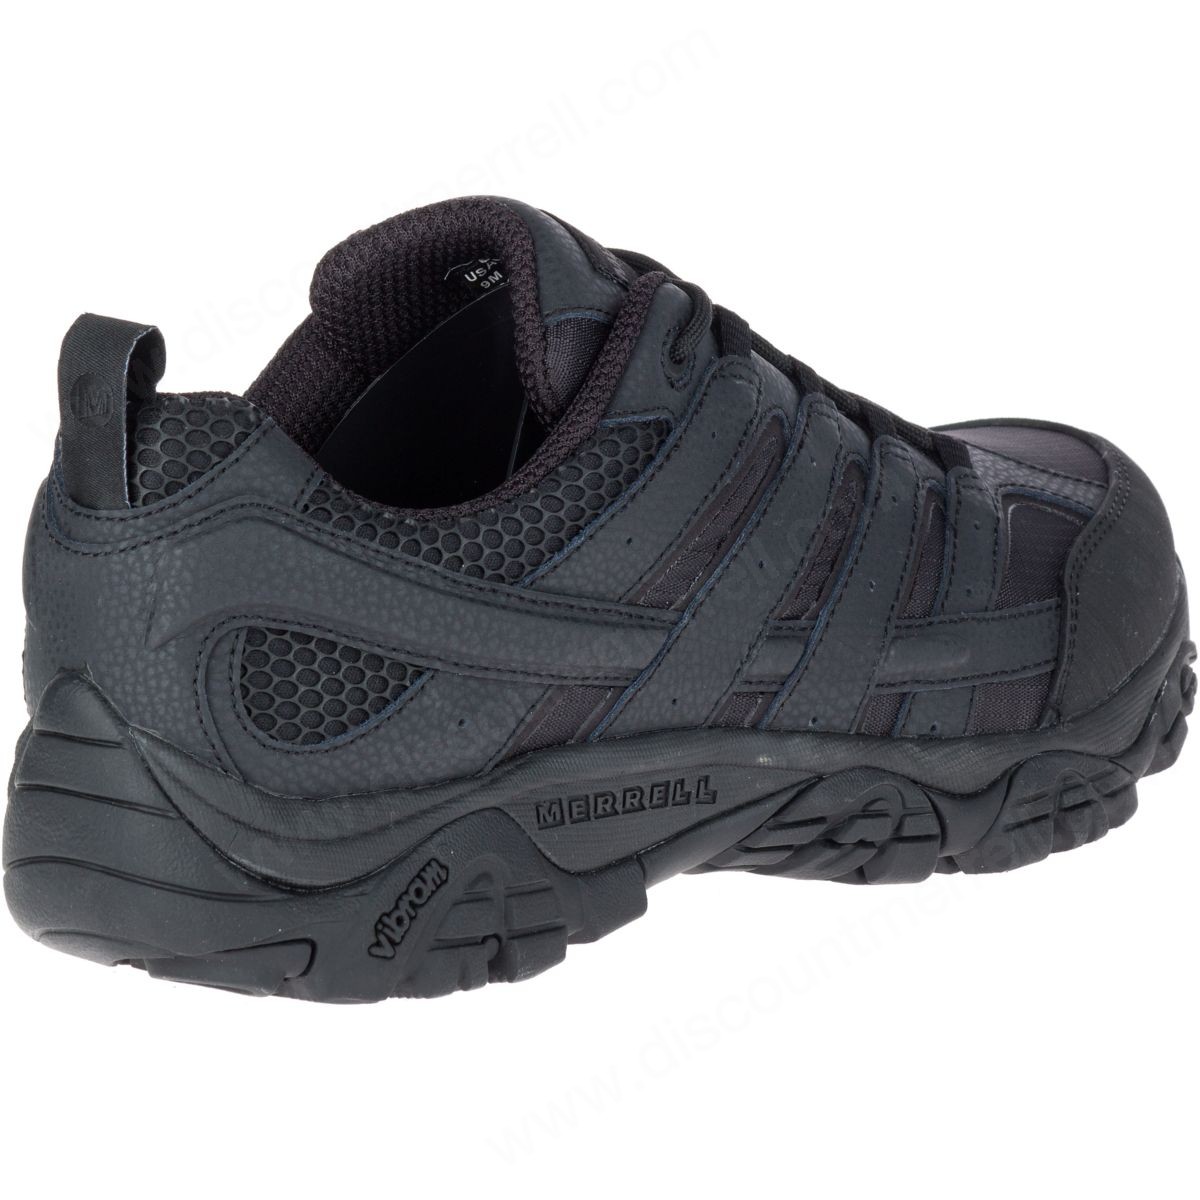 Merrell Man's Moab Tactical Shoes Wide Black - -7